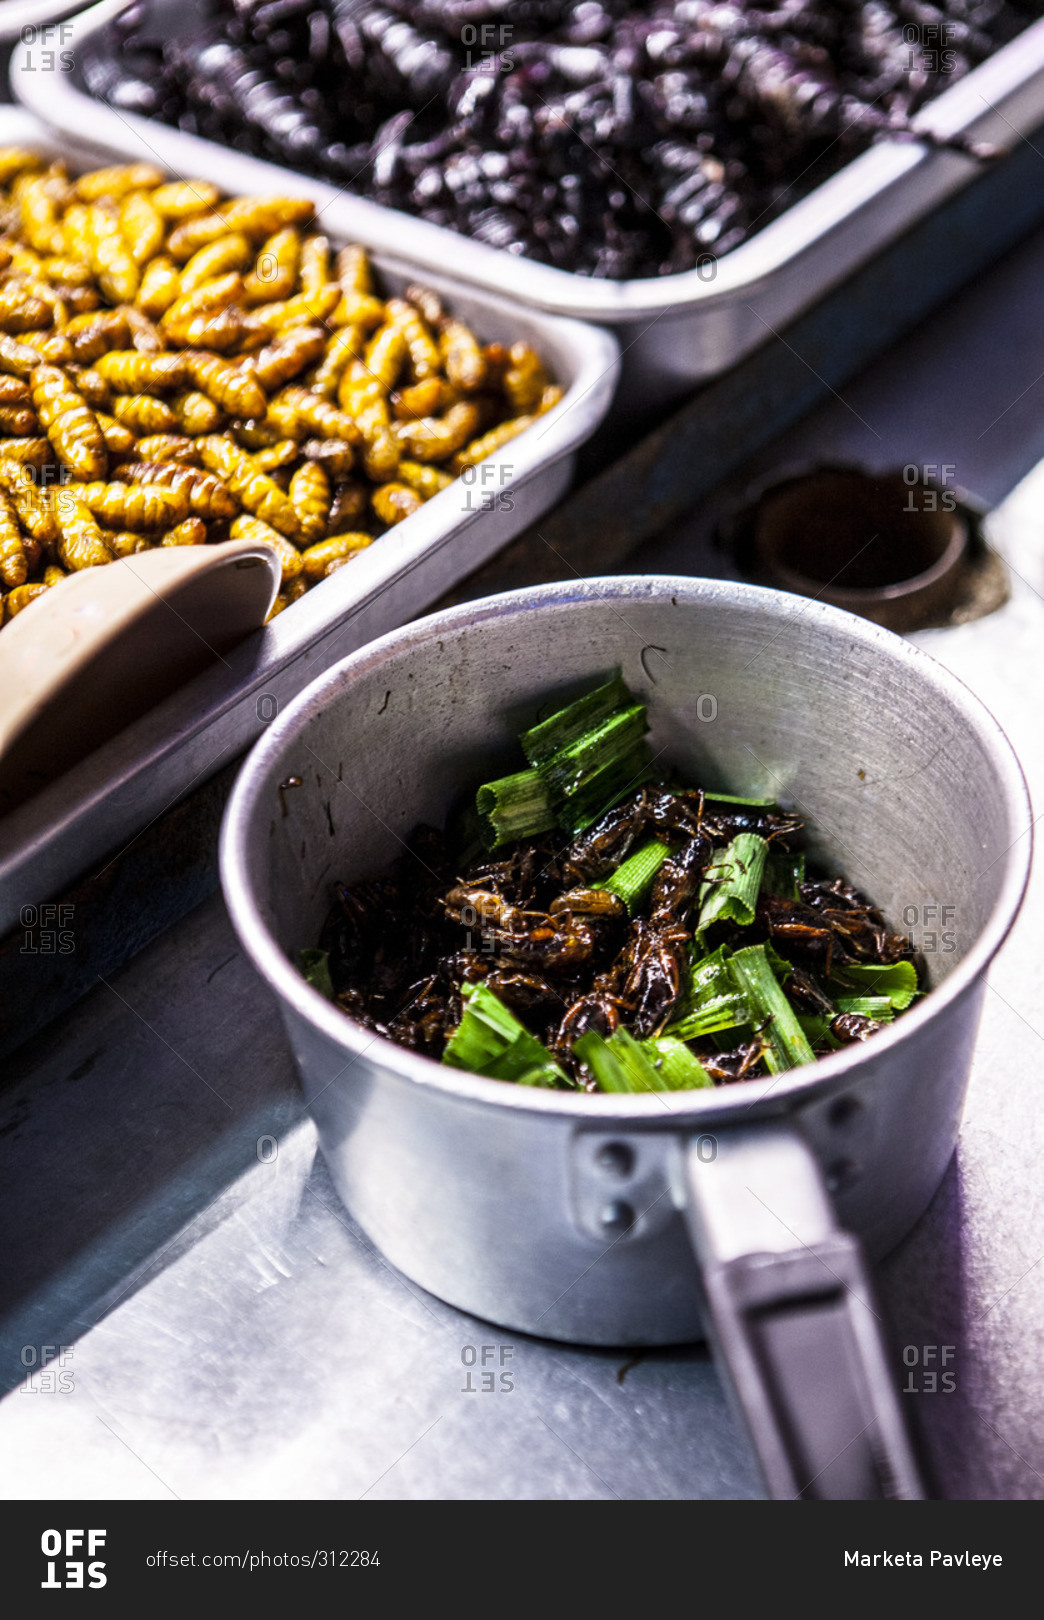 Insects in Thai food stand